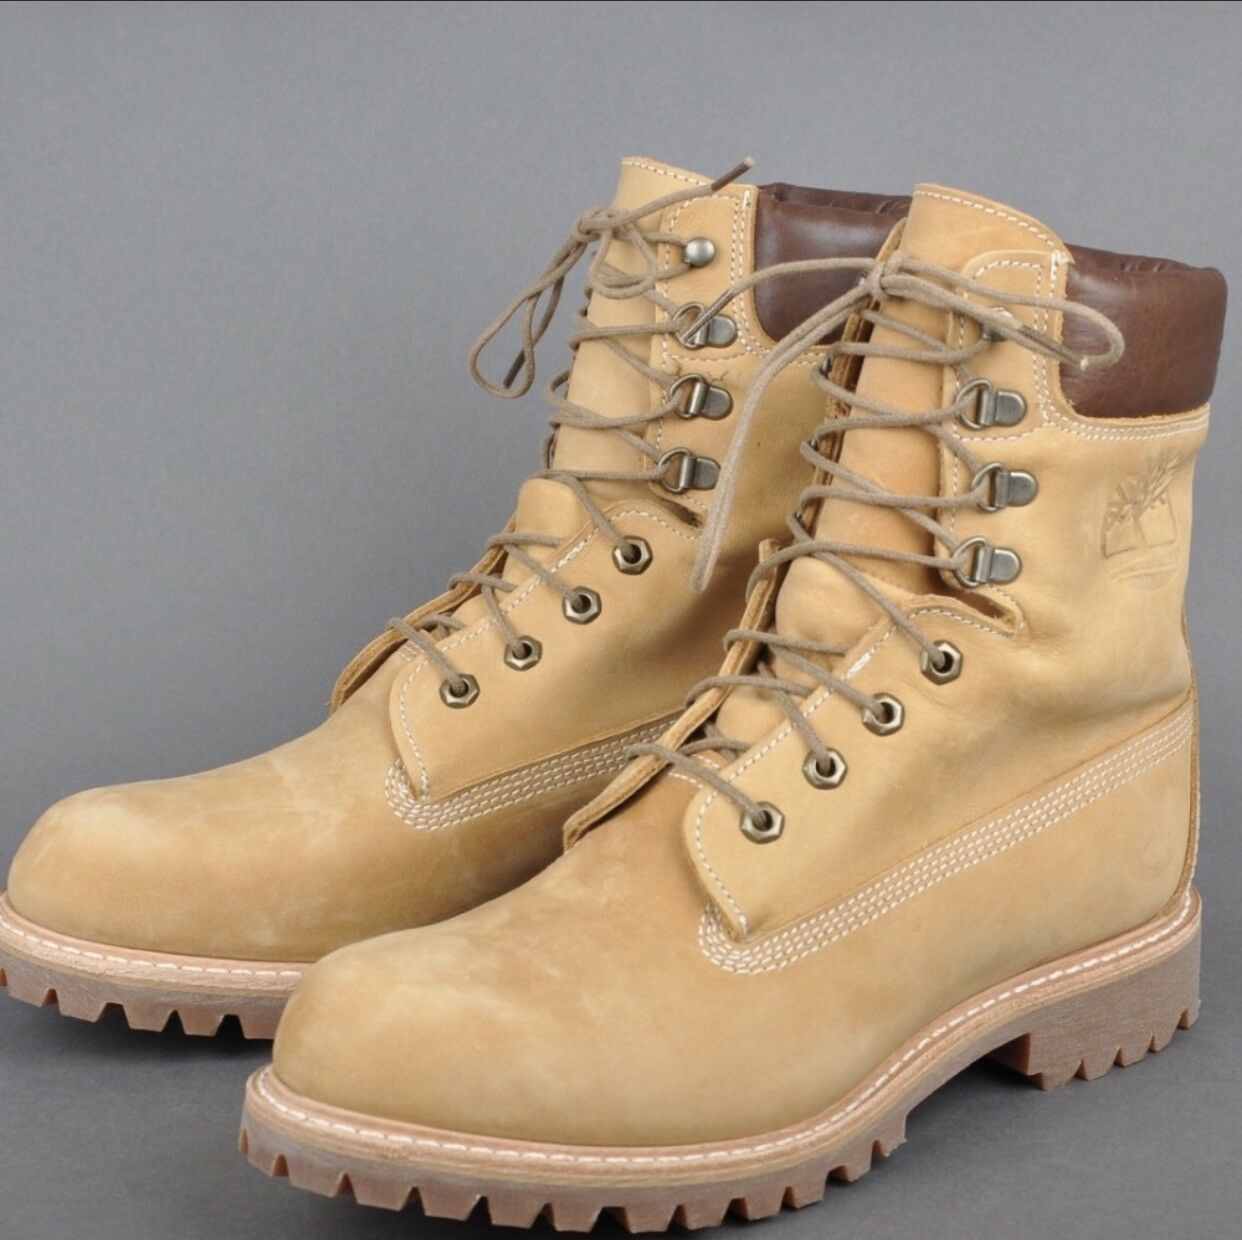 Timberland Made In USA 8 Inch Waterproof Boot. Wicket Crate (wheat) Size 8.5M - Boots